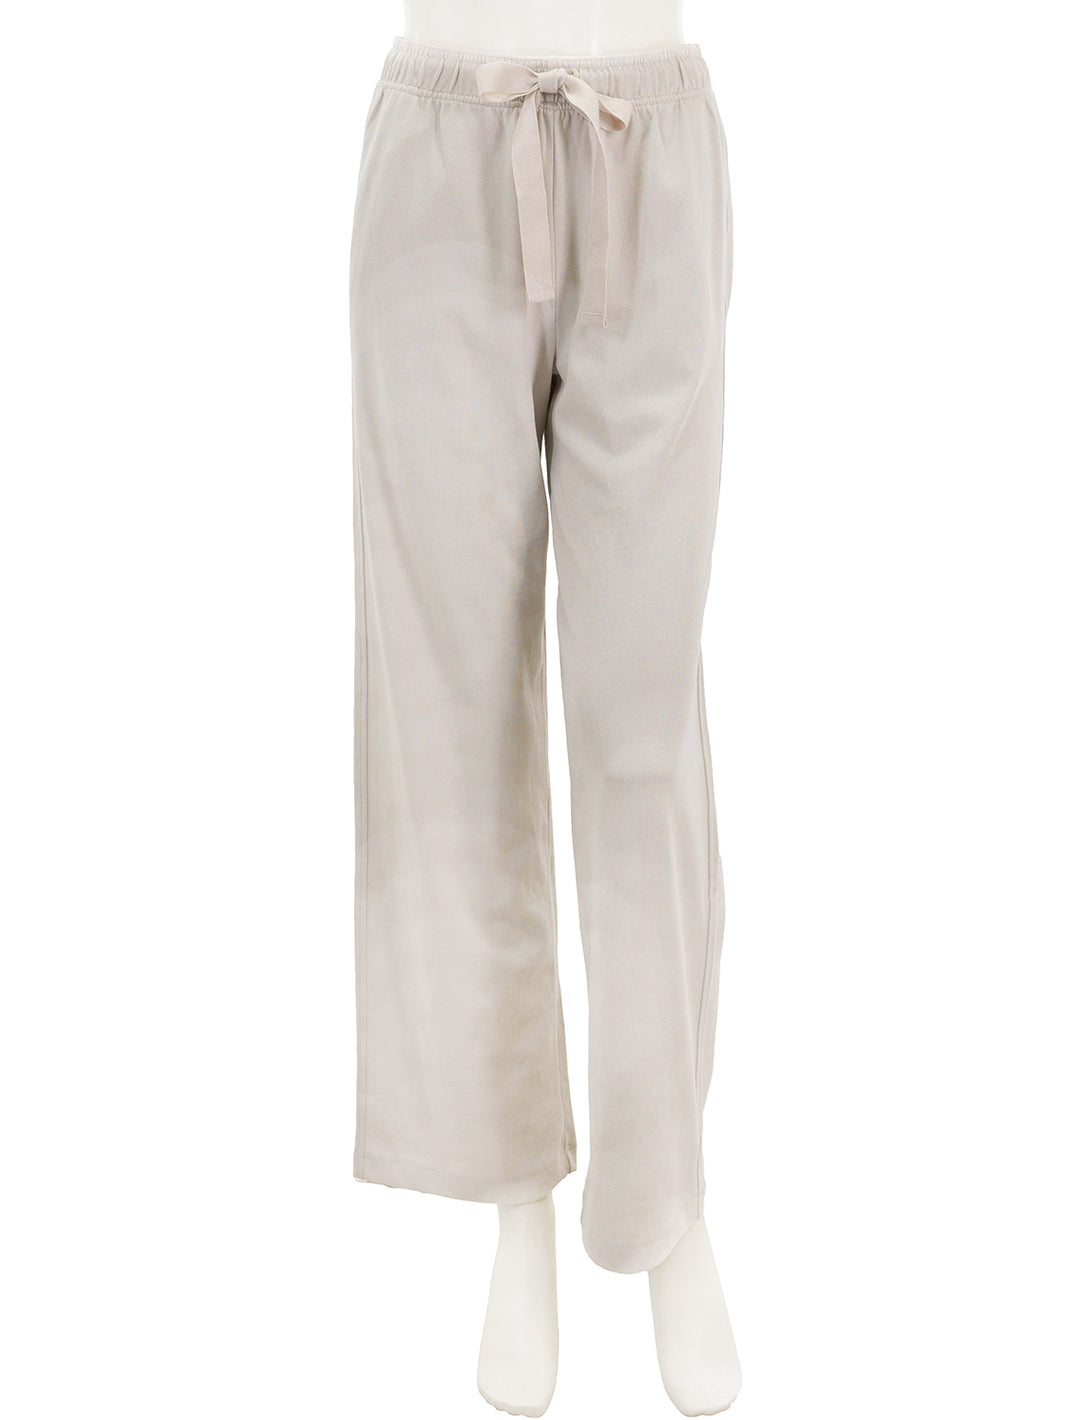 Women's Lounge Bottoms and Sweatpants – Twigs